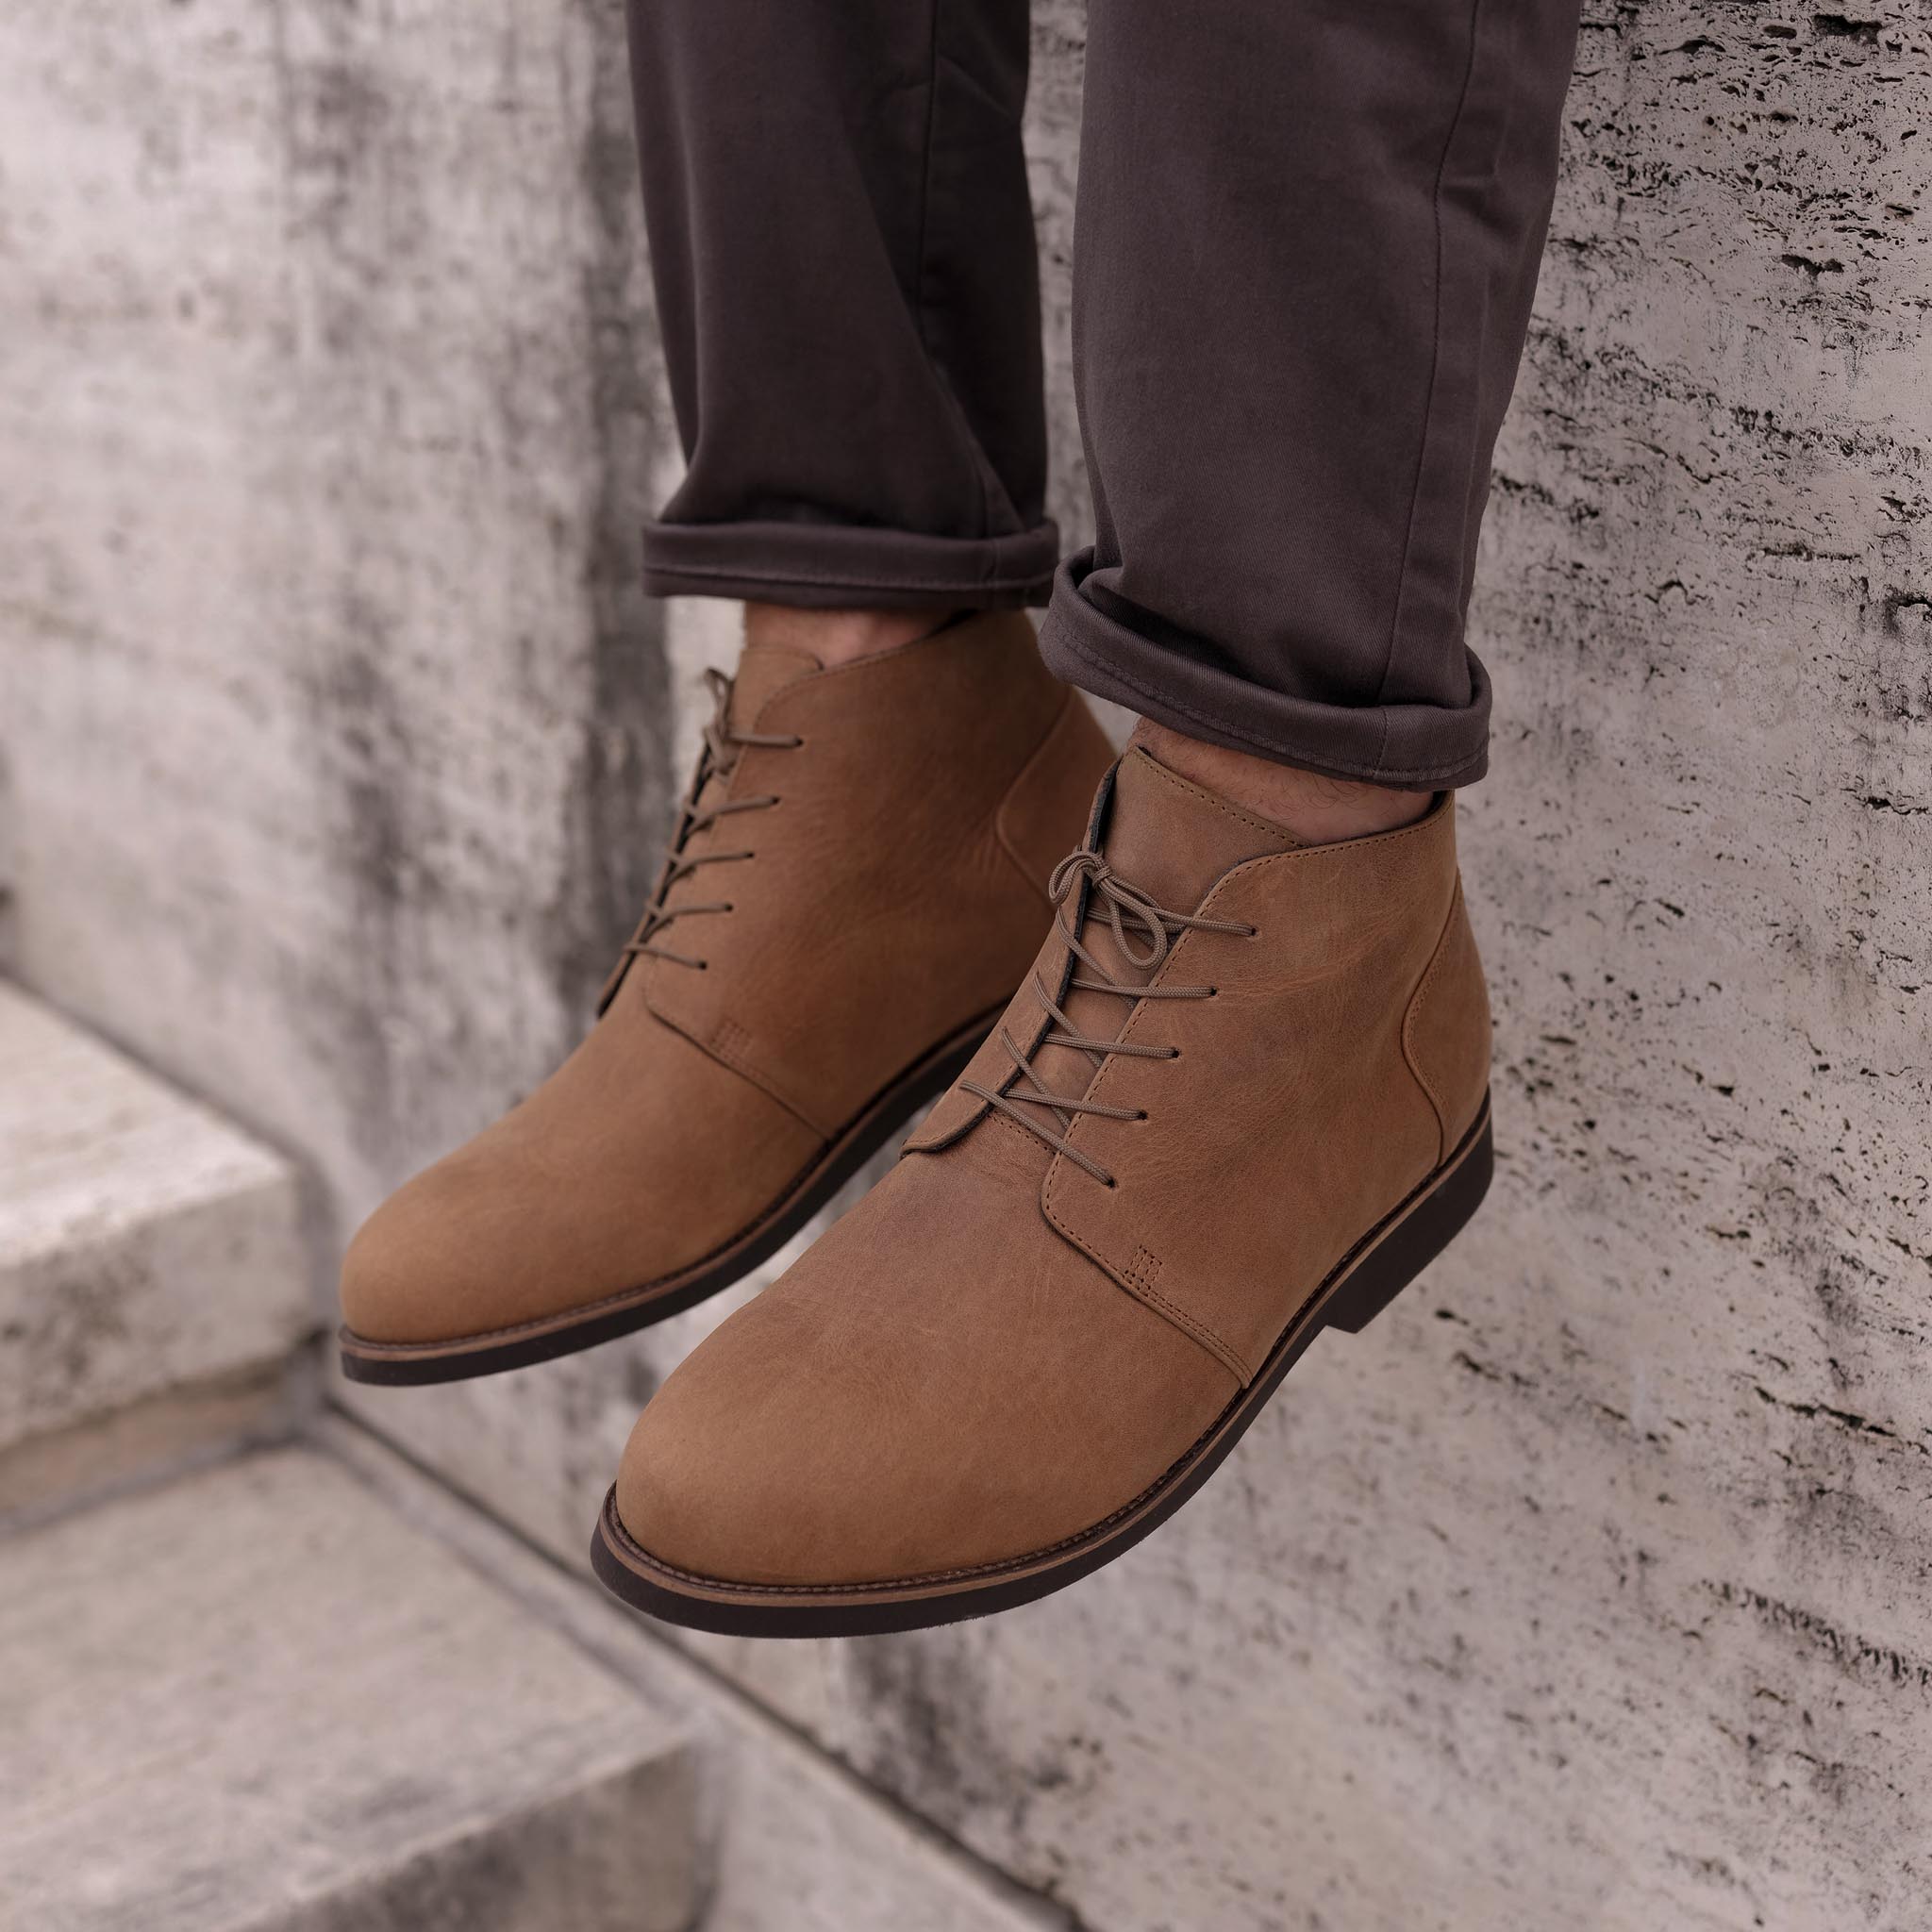 Image 1 of the Daytripper Chukka Boot Tobacco on model